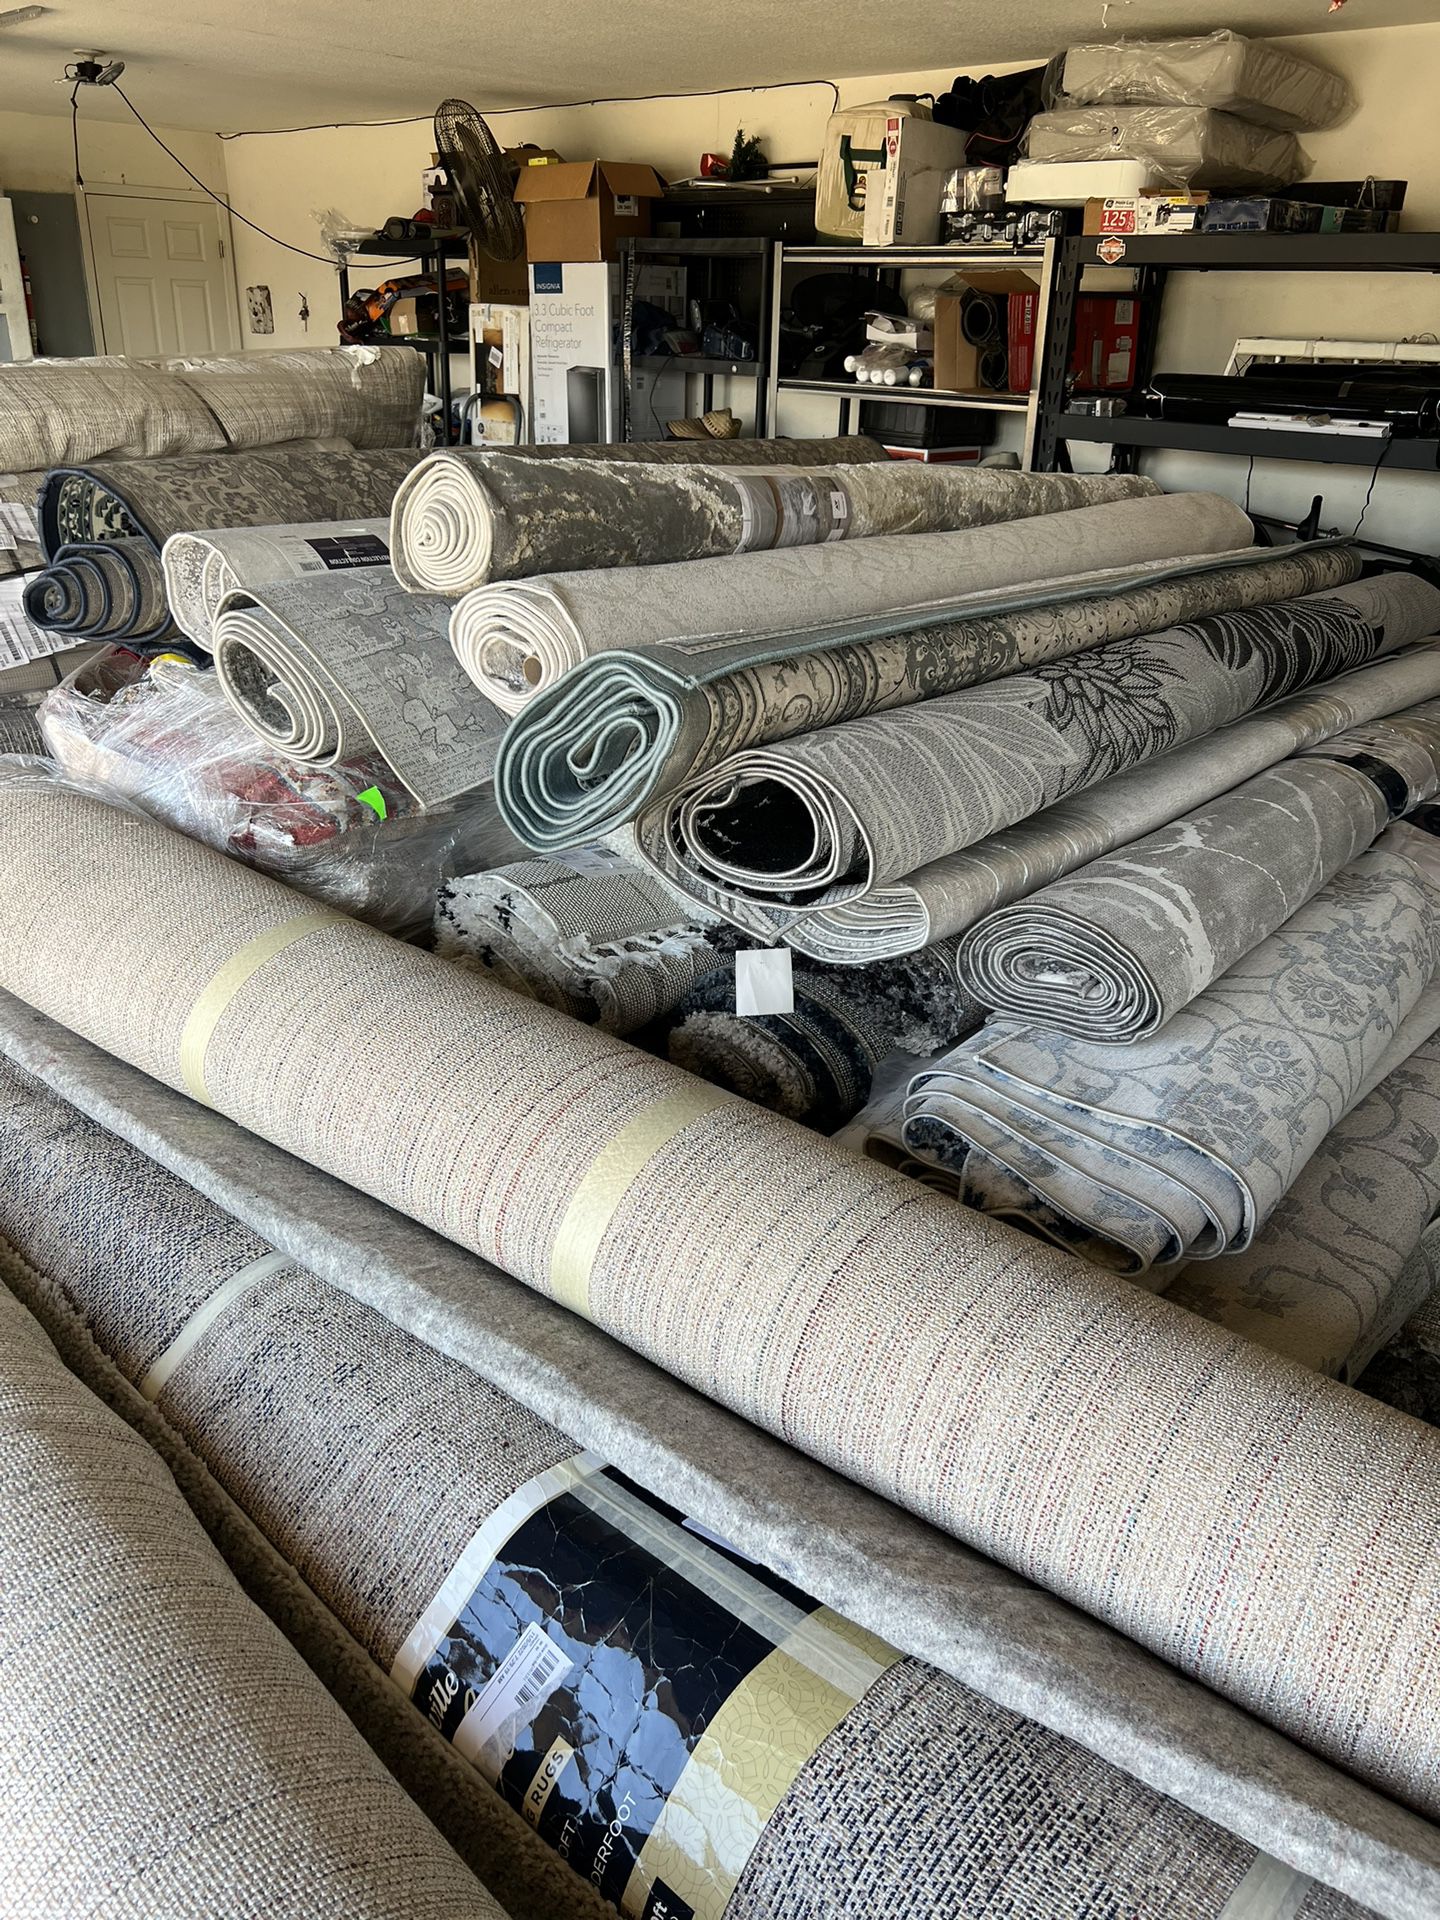 Area Rugs From Costco 9x12*8x10*9x13 Buy a $300 Rug 4 $75 for Sale in  Madera, CA - OfferUp